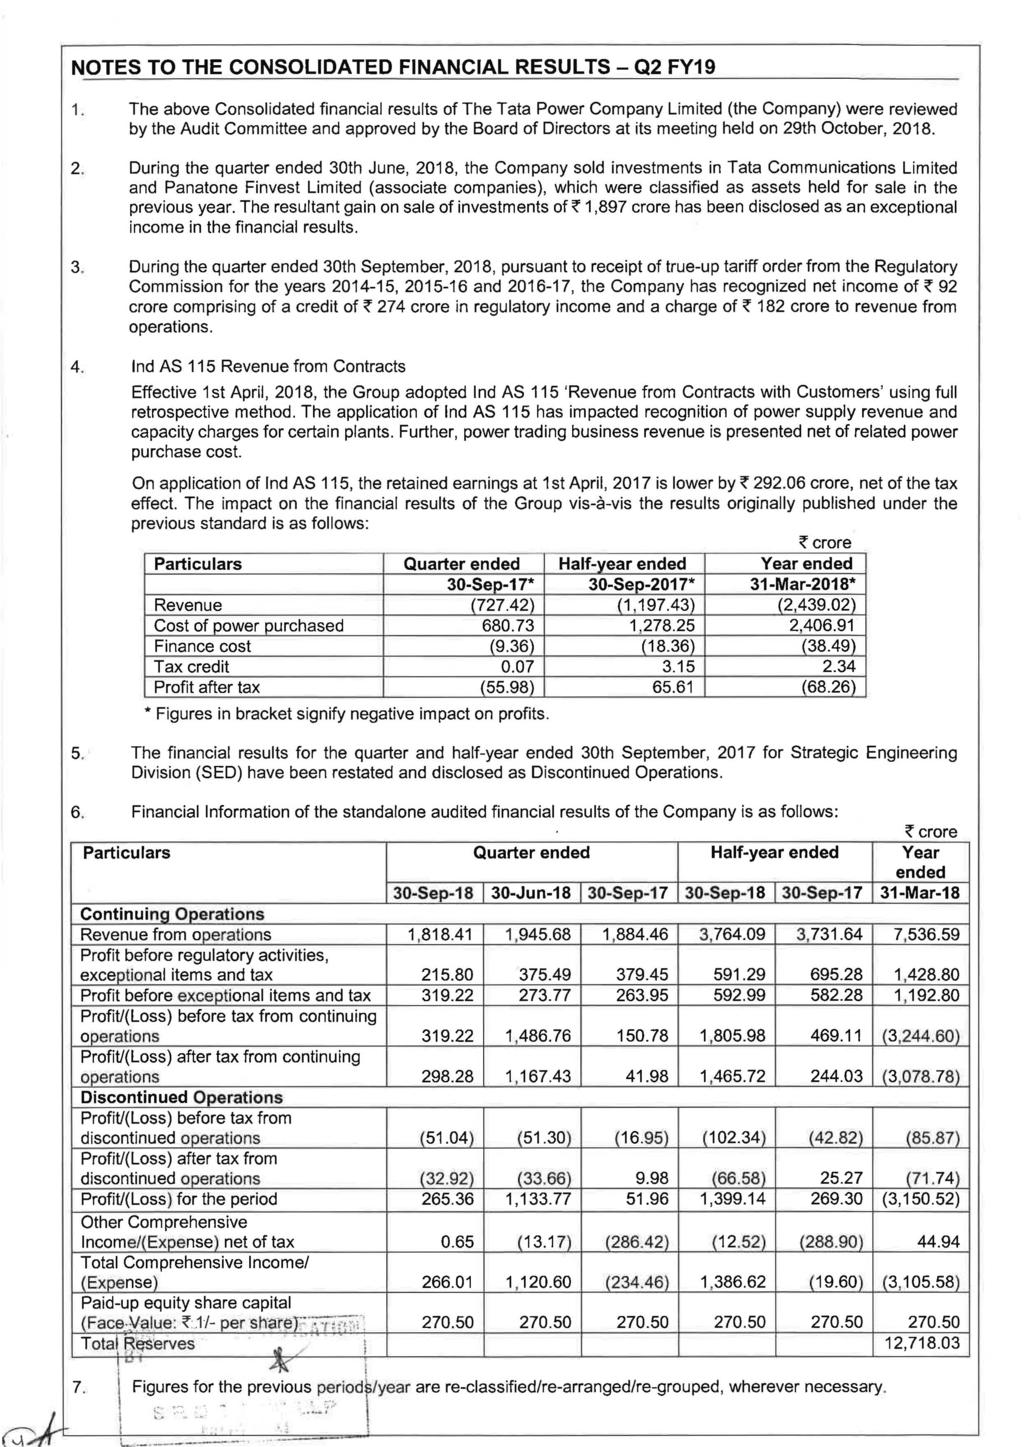 NOTES TO THE CONSOLDATED FNANCAL RES UL TS Q2 FY19 1.